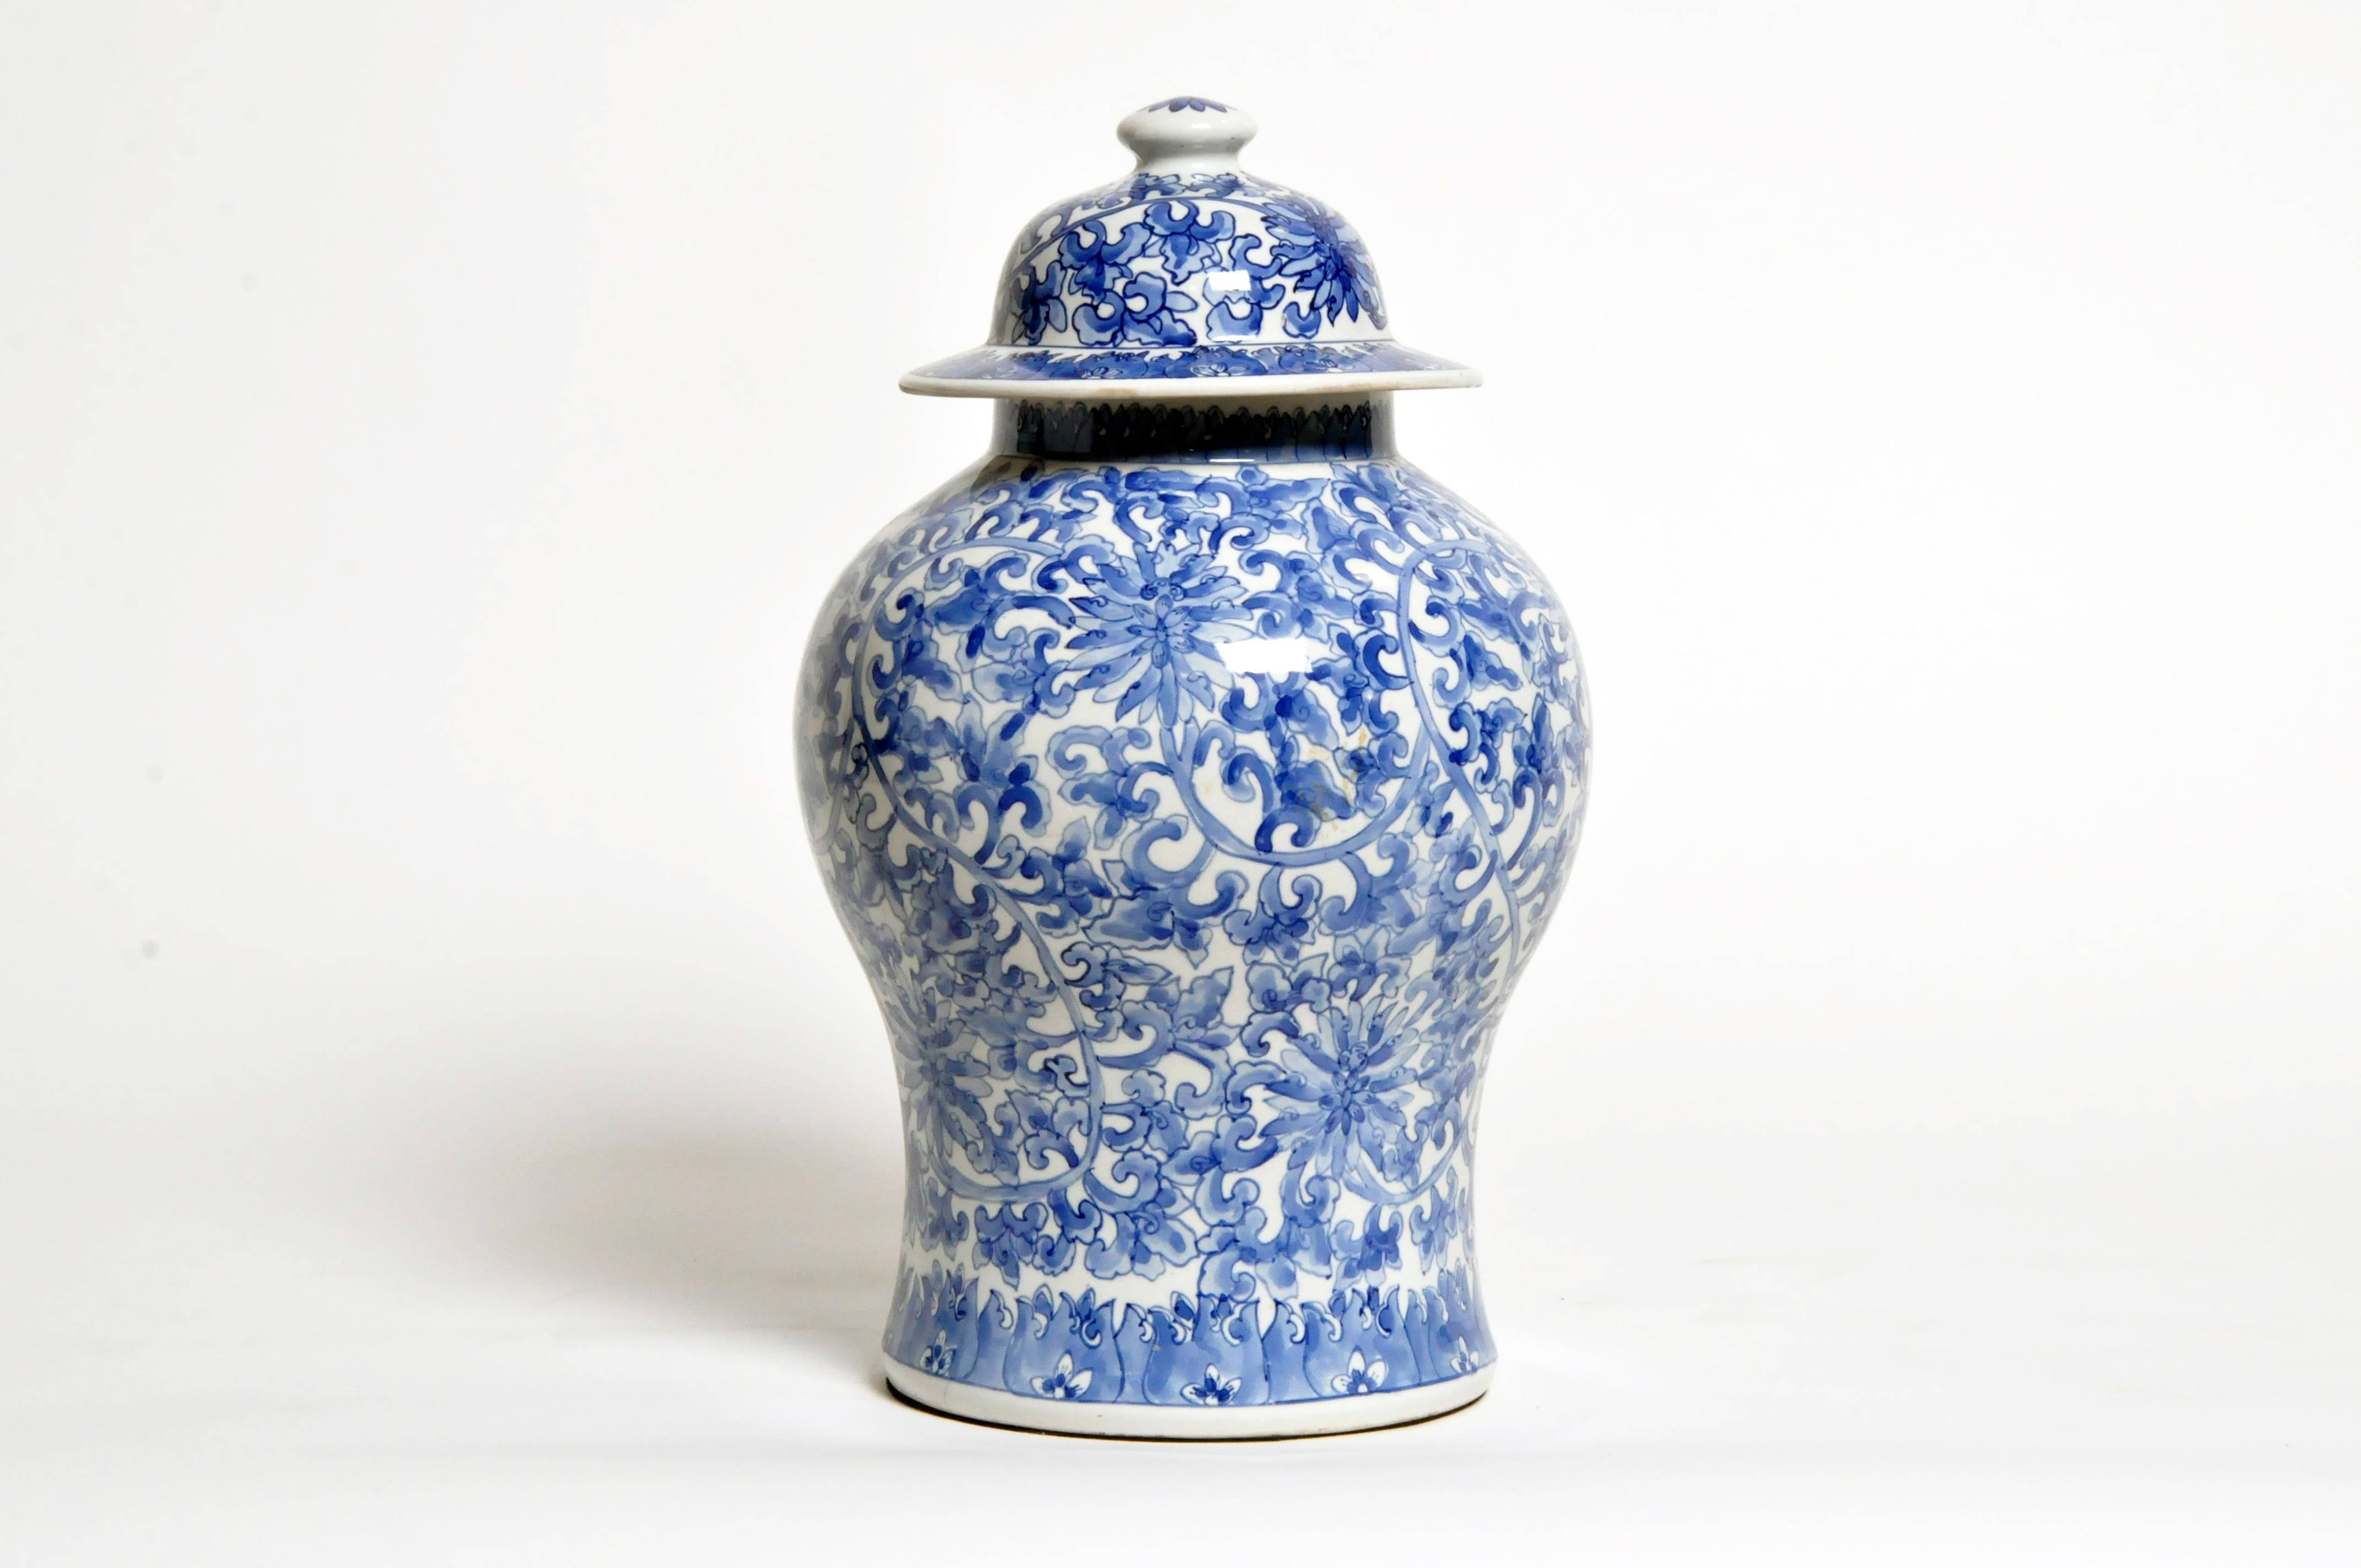 Beautiful contemporary blue and white ceramic vase from Shanxi, China to accent and add a pop of color to your space. Price is for each vase.